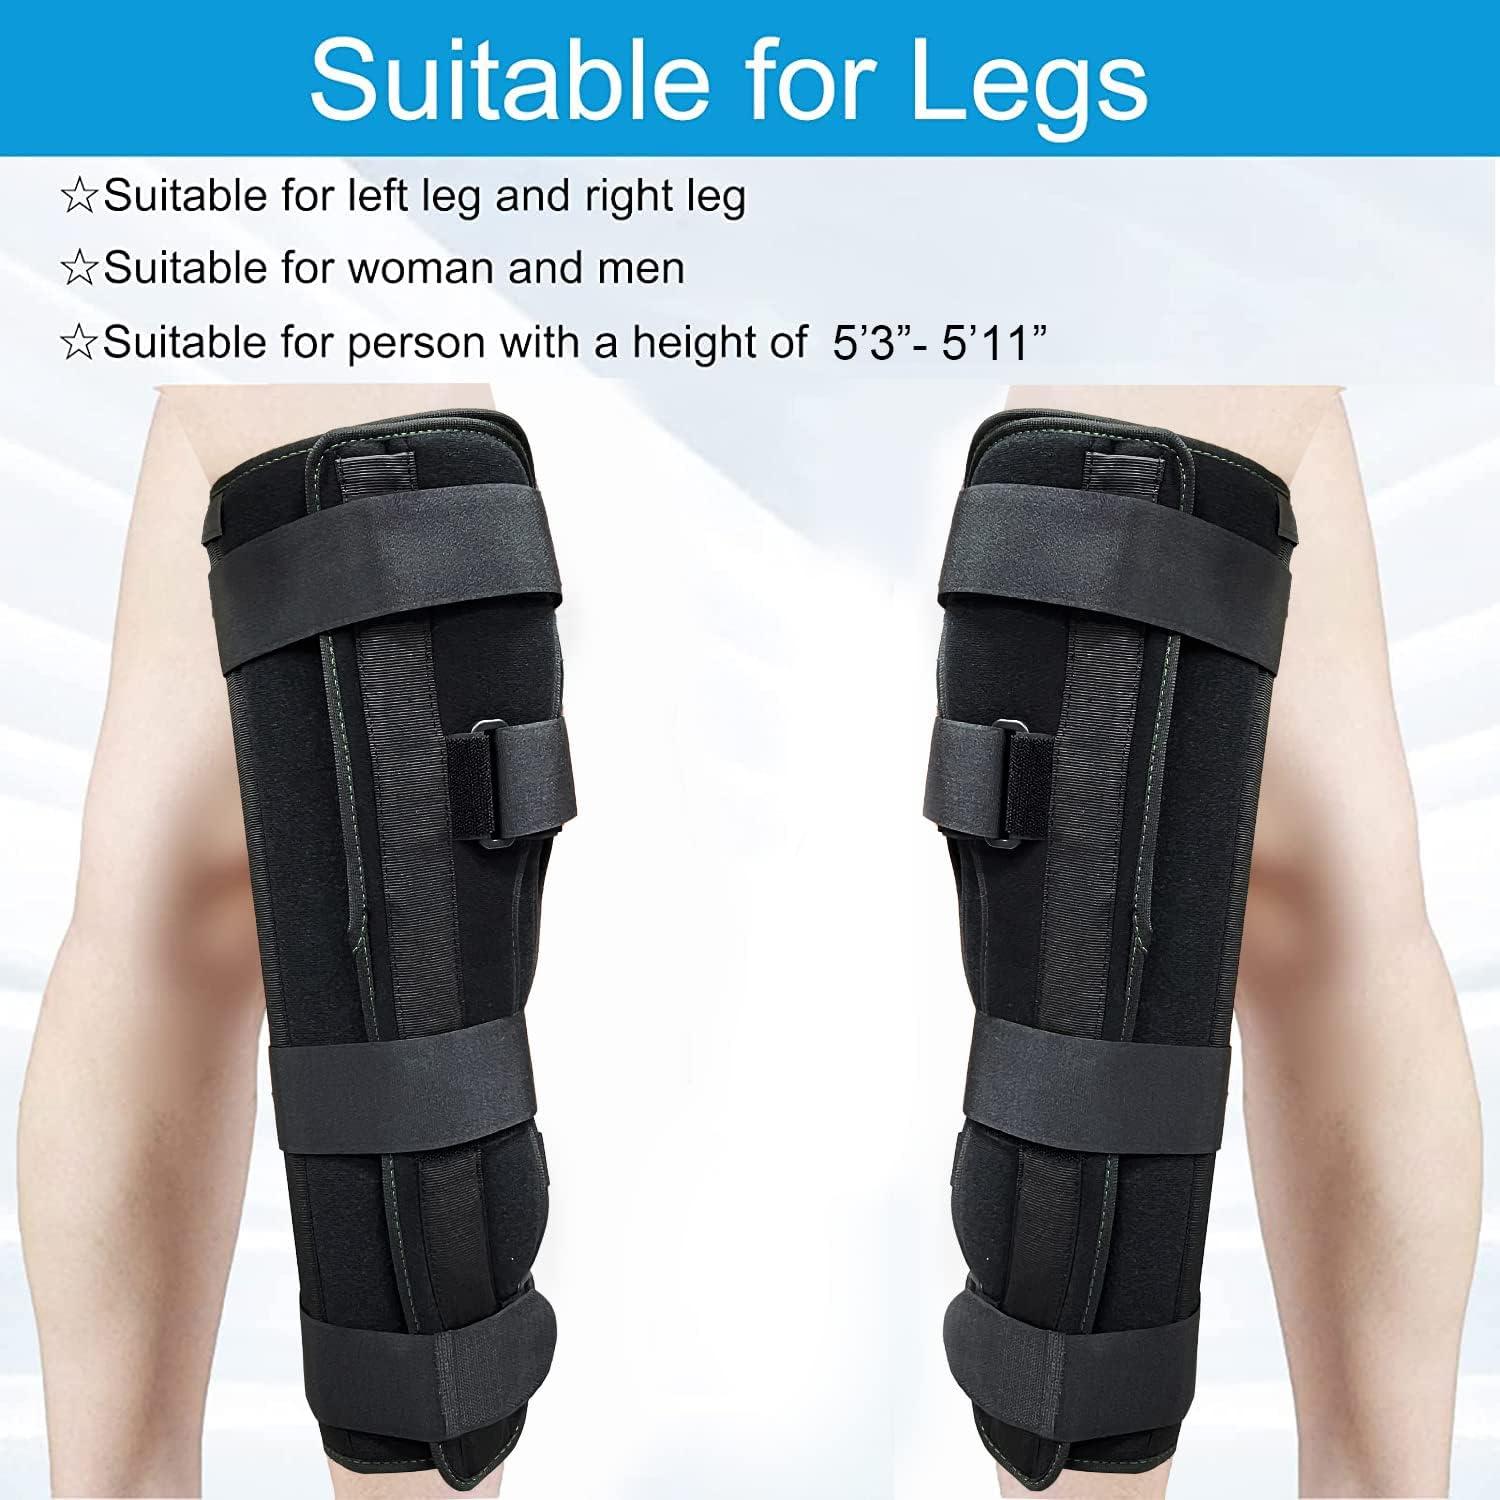 Knee Immobilizer, Full Leg Brace, Leg Immobilizer Brace, Breathable  Adjustable Comfort Splint, for Post-Surgery Recovery,L,High Credit1 :  : Health & Personal Care